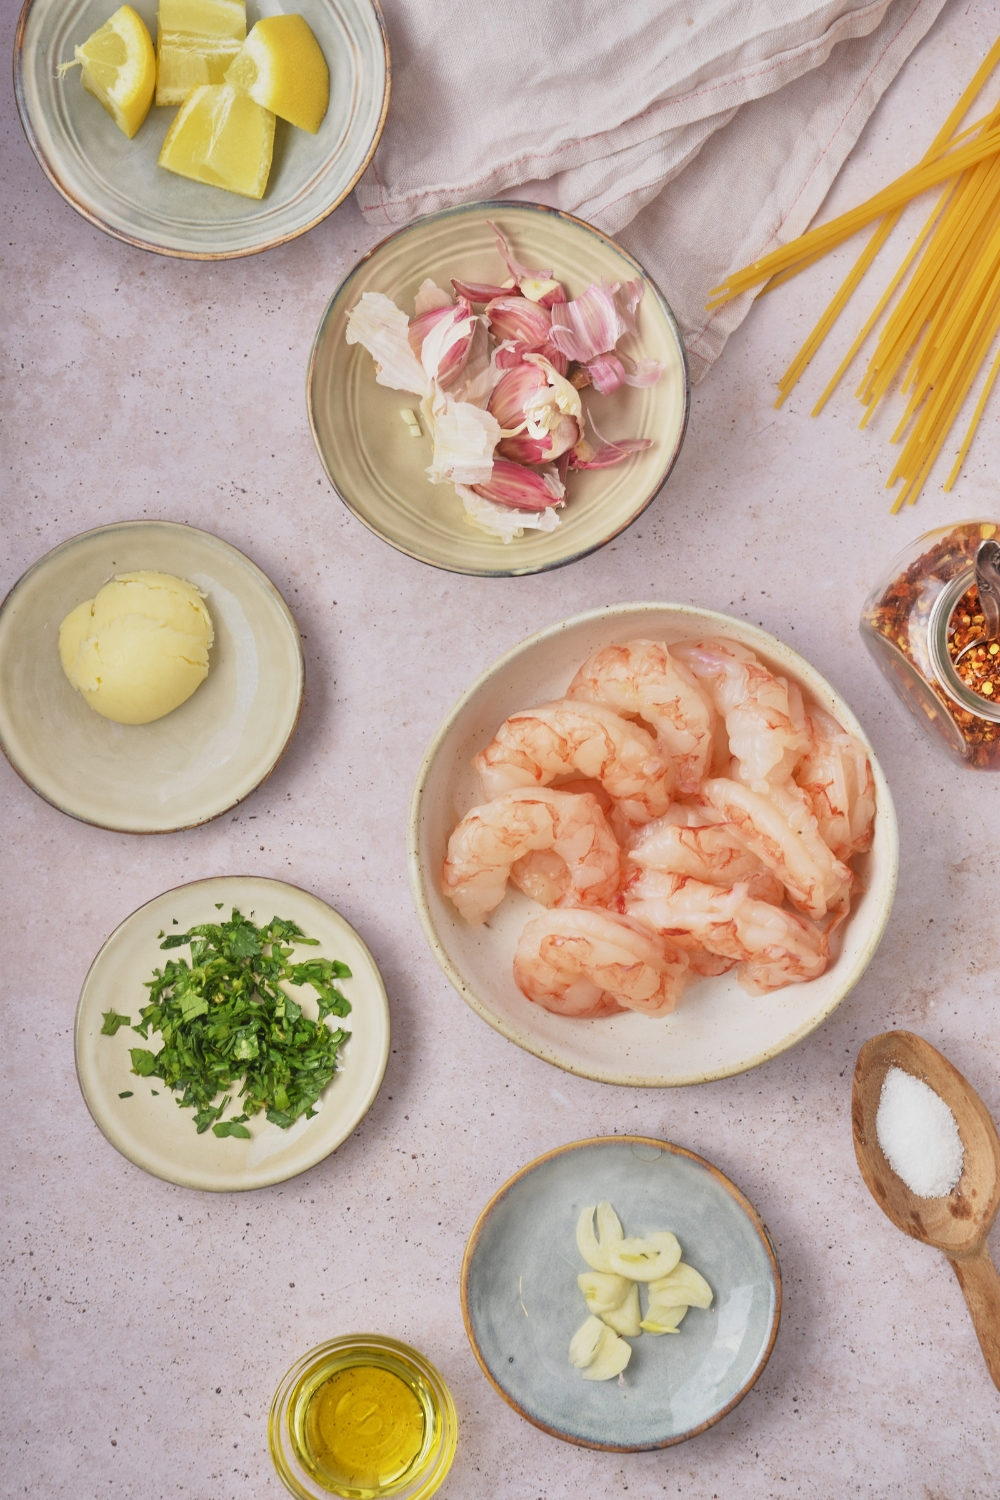 Overhead view of an assortment of ingredients including bowls of raw shrimp, butter, fresh green herbs, oil, garlic, and lemon slices.